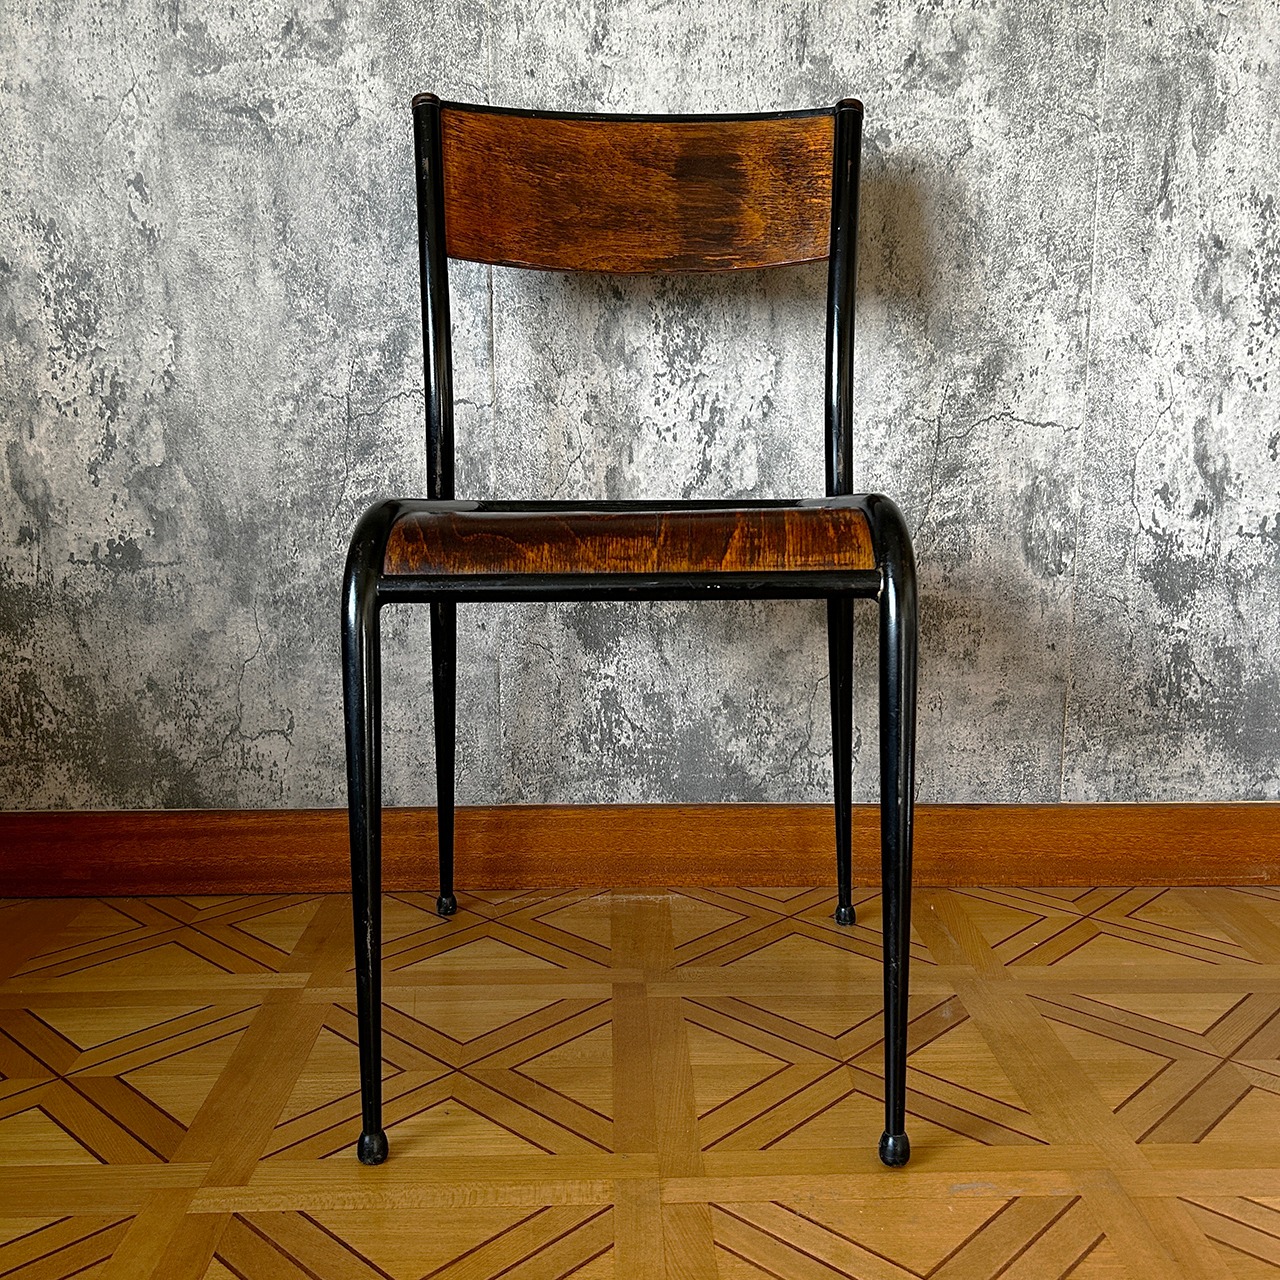 50's Vintage French Industrial School Chair #1 Used 中古 リペア済